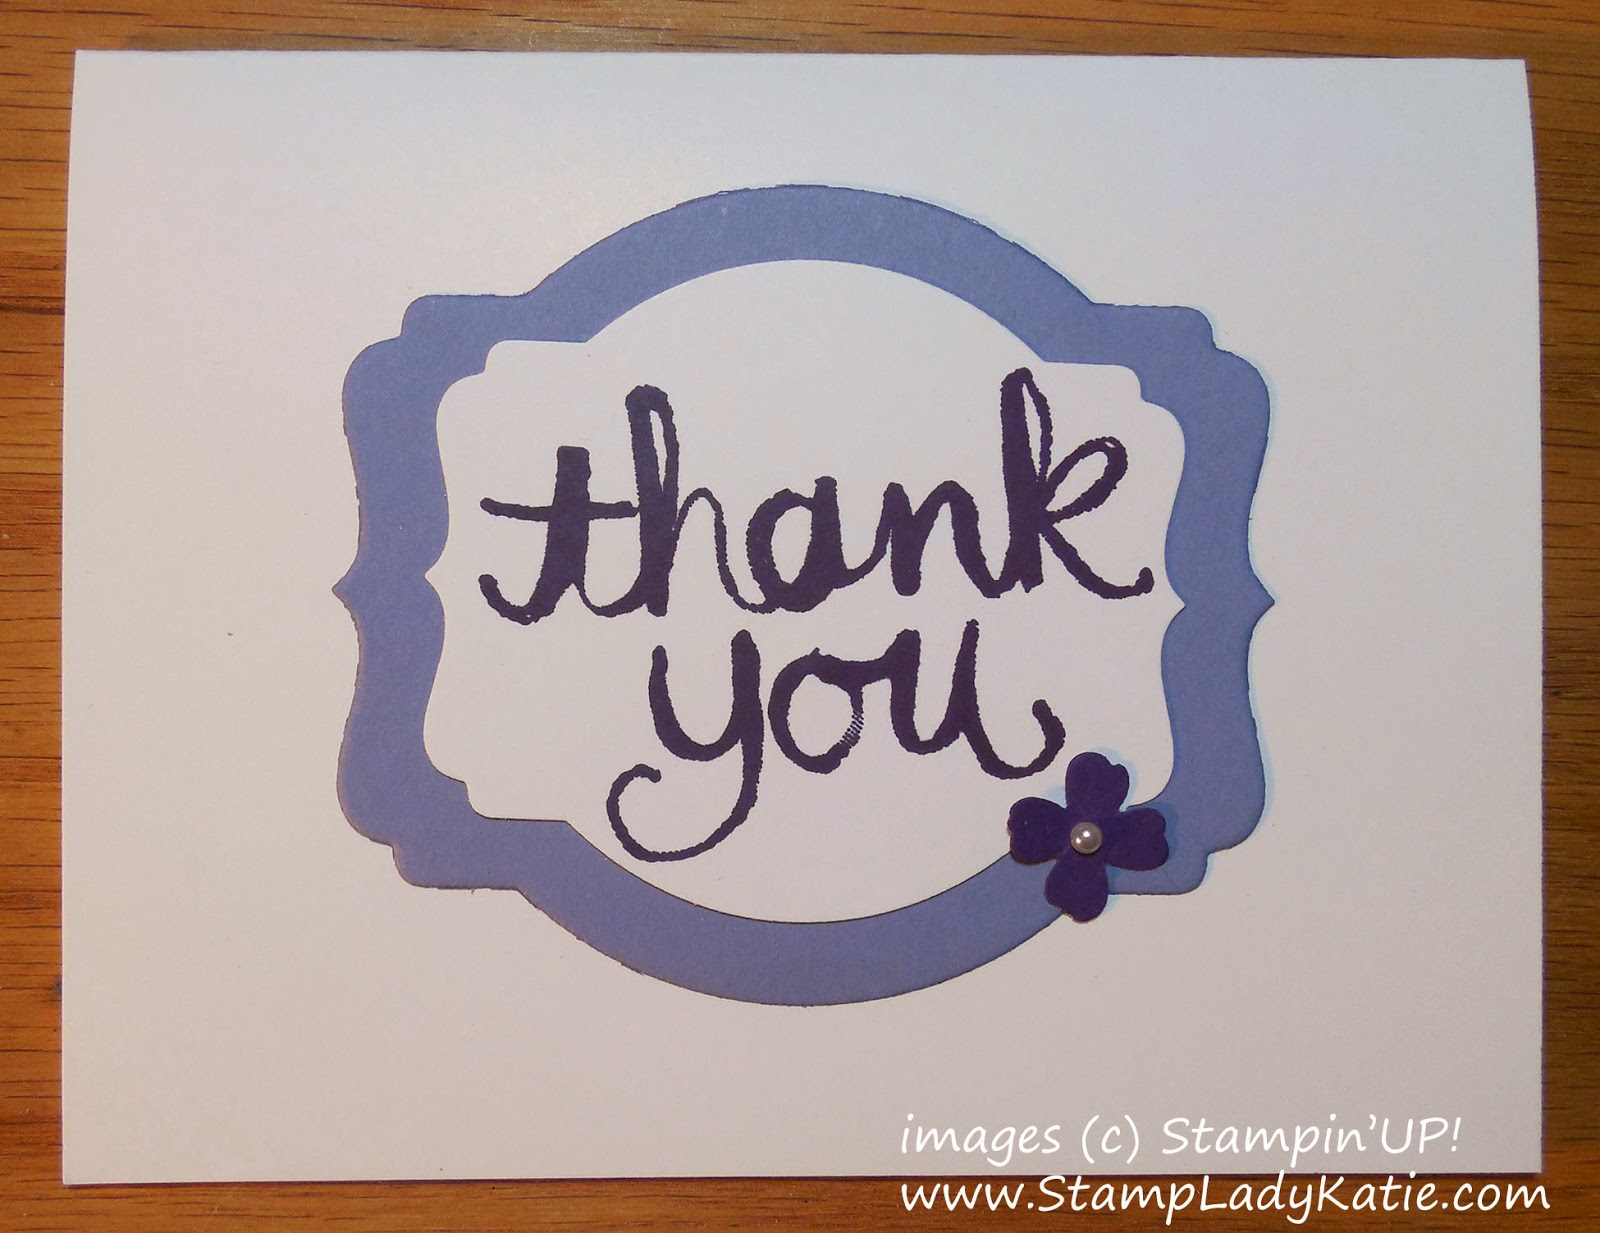 Thank-you card made with Stampin'UP!'s Watercolor Thankyou Set and Deco Labels Framelits